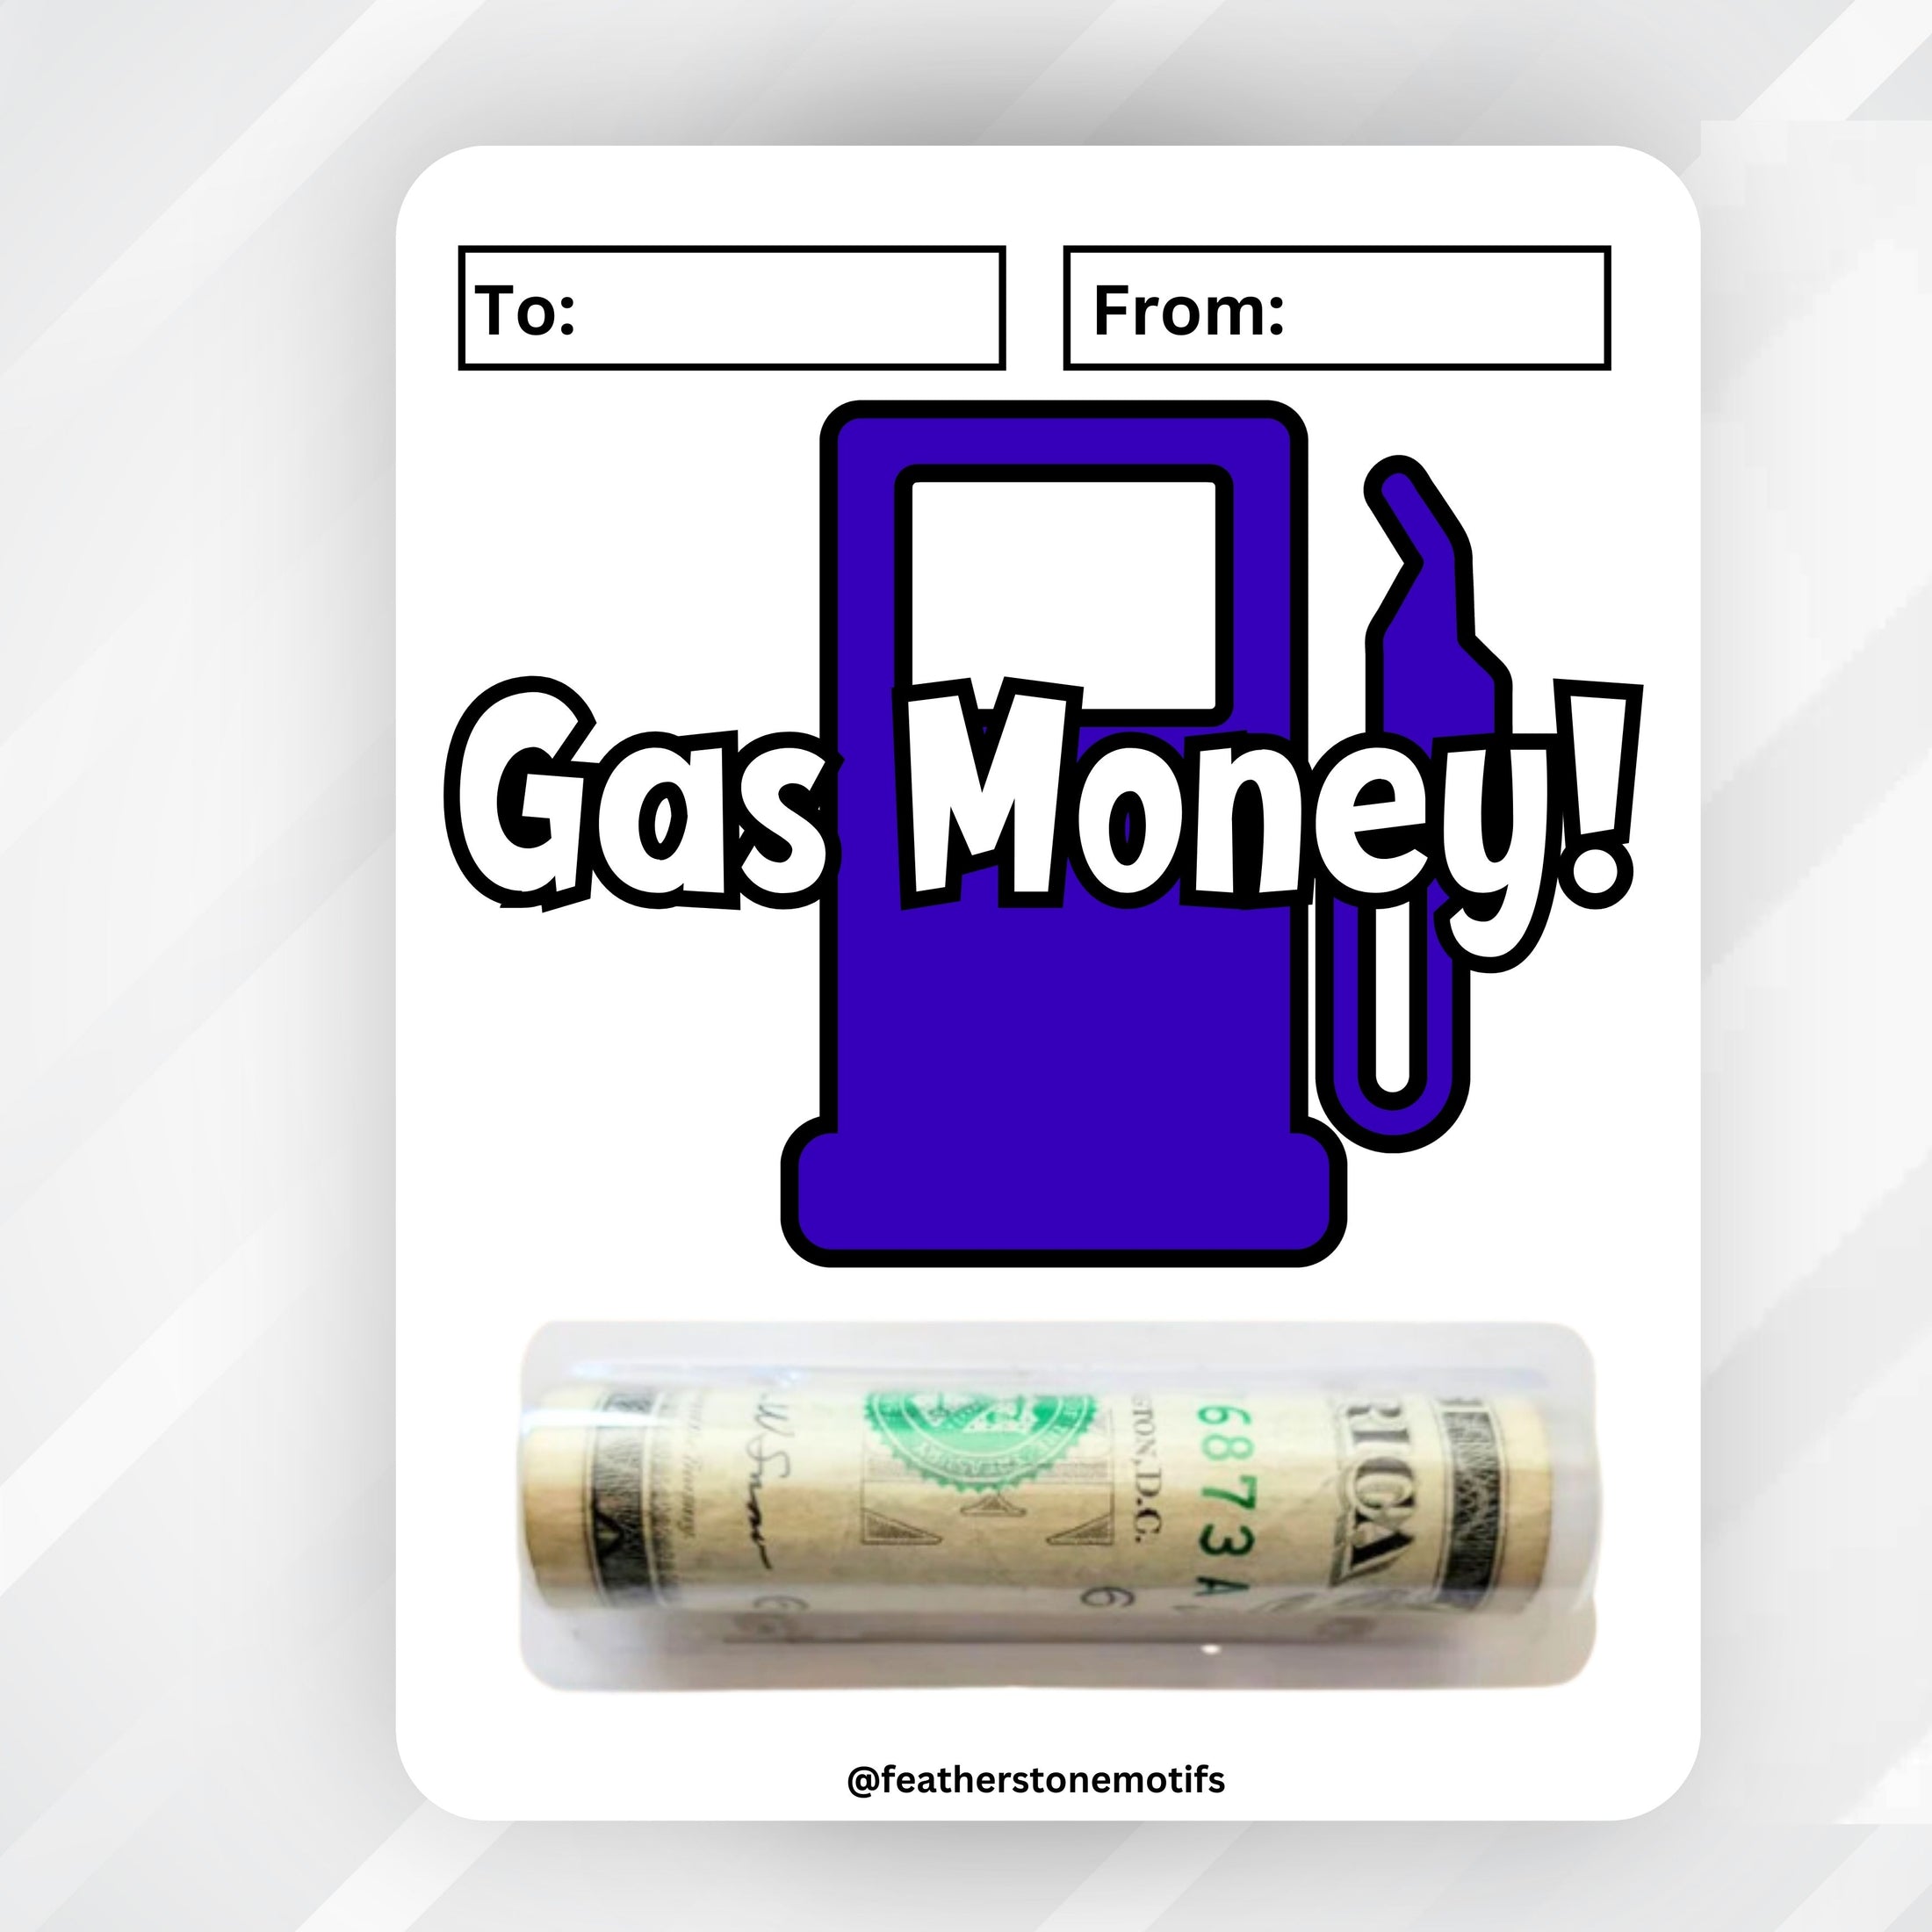 This image shows the money tube attached to the Gas Money 3 Money Card.